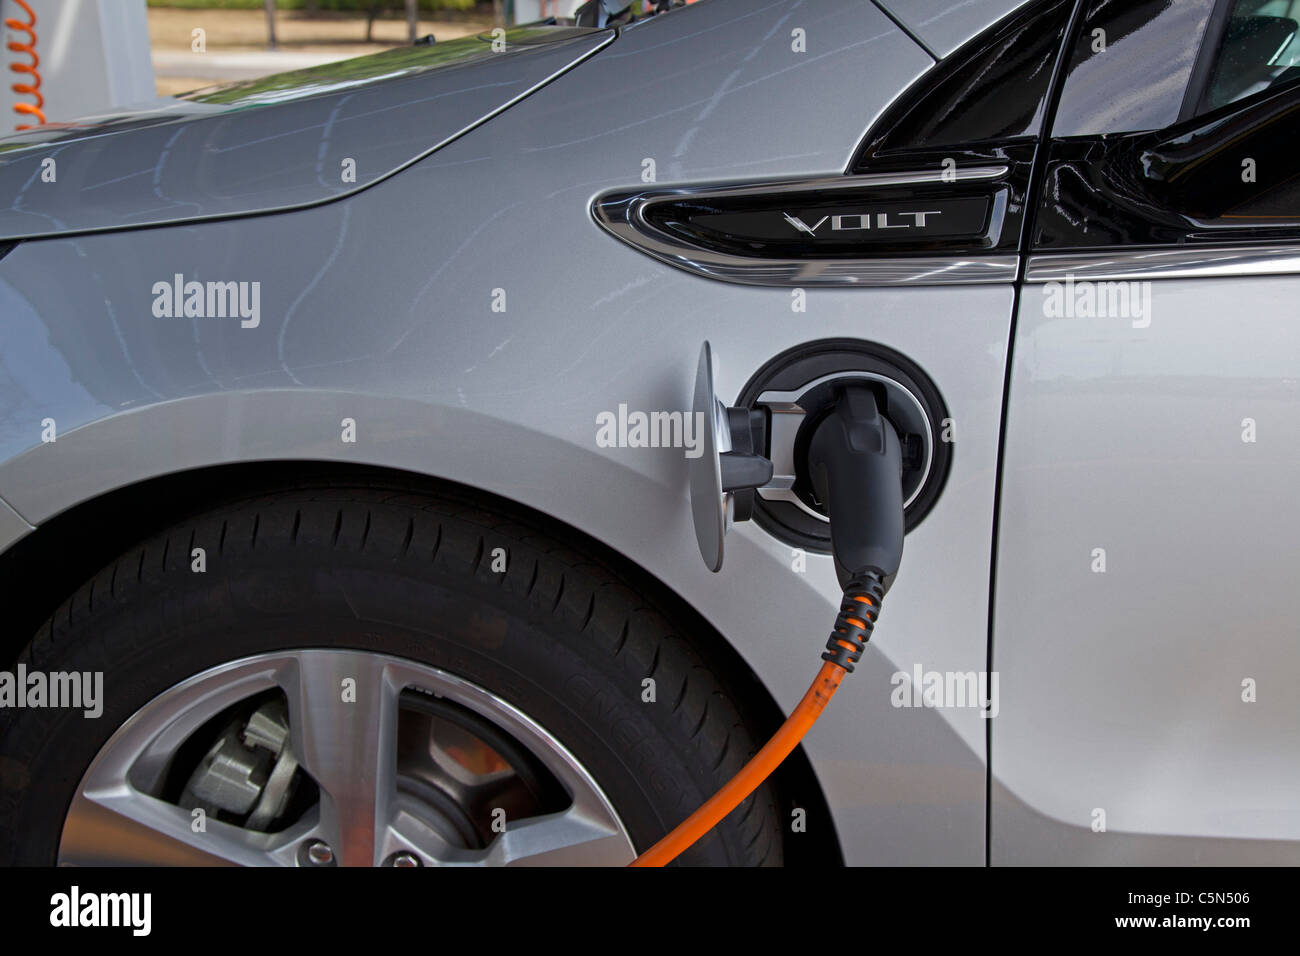 Chevrolet Volt Plug-In Electric Car at Charging Station Stock Photo